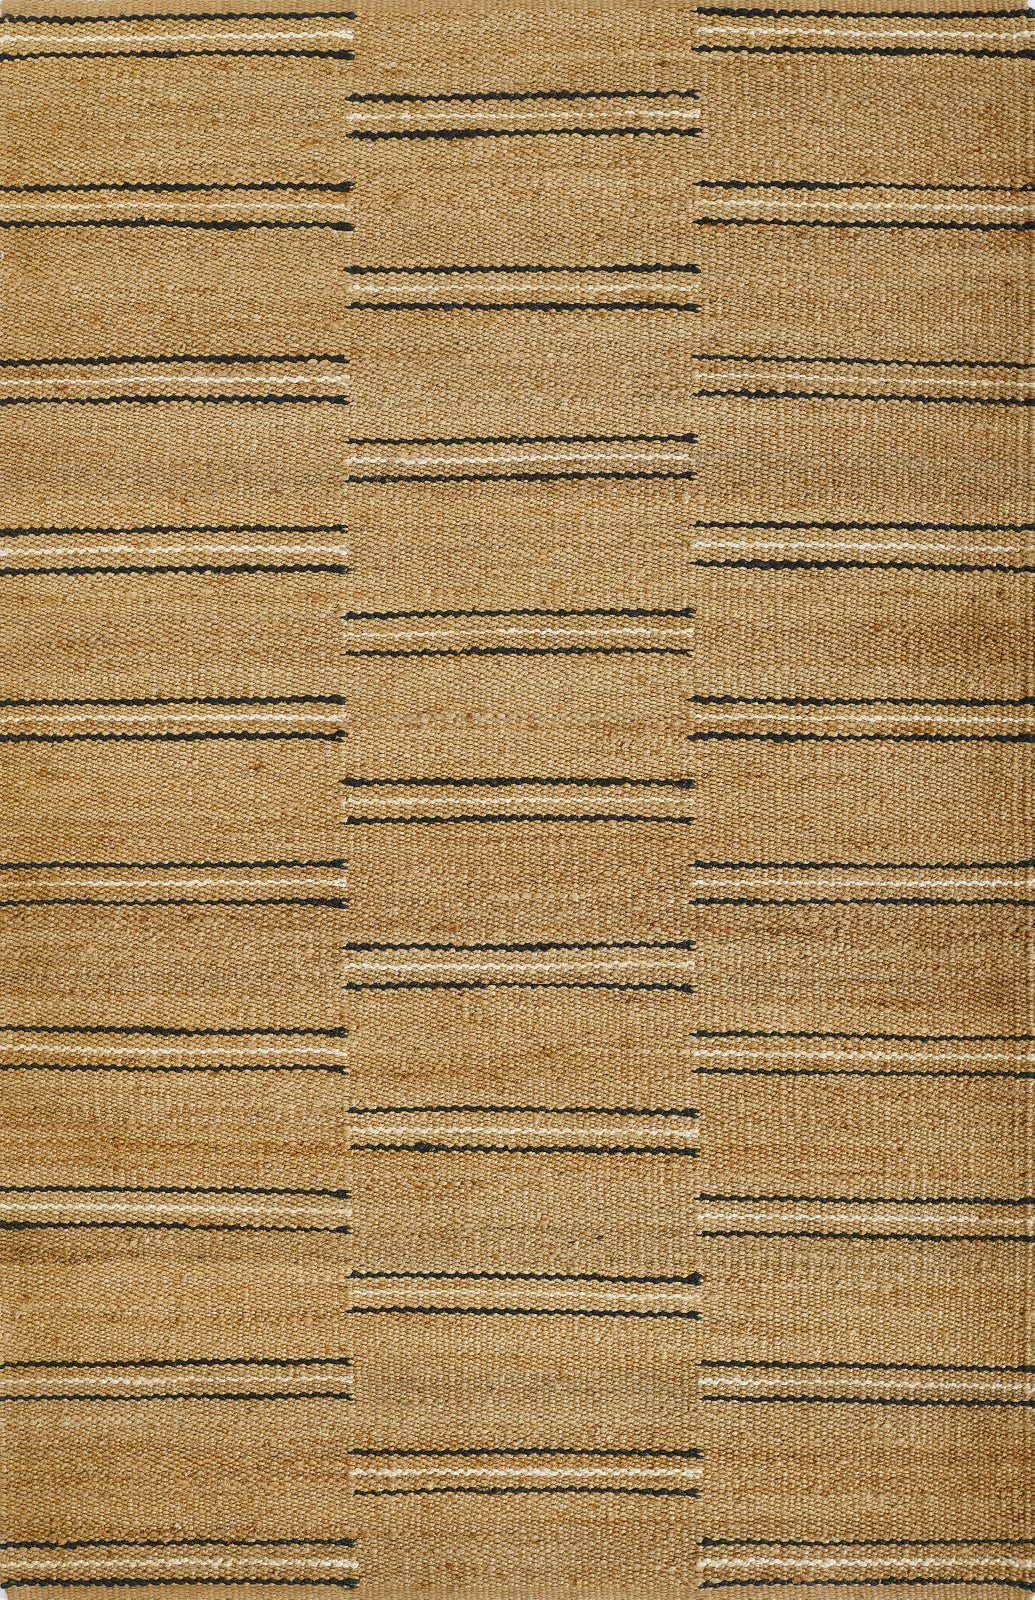 Momeni Crescent CRE-2 Natural Area Rug by Erin Gates main image